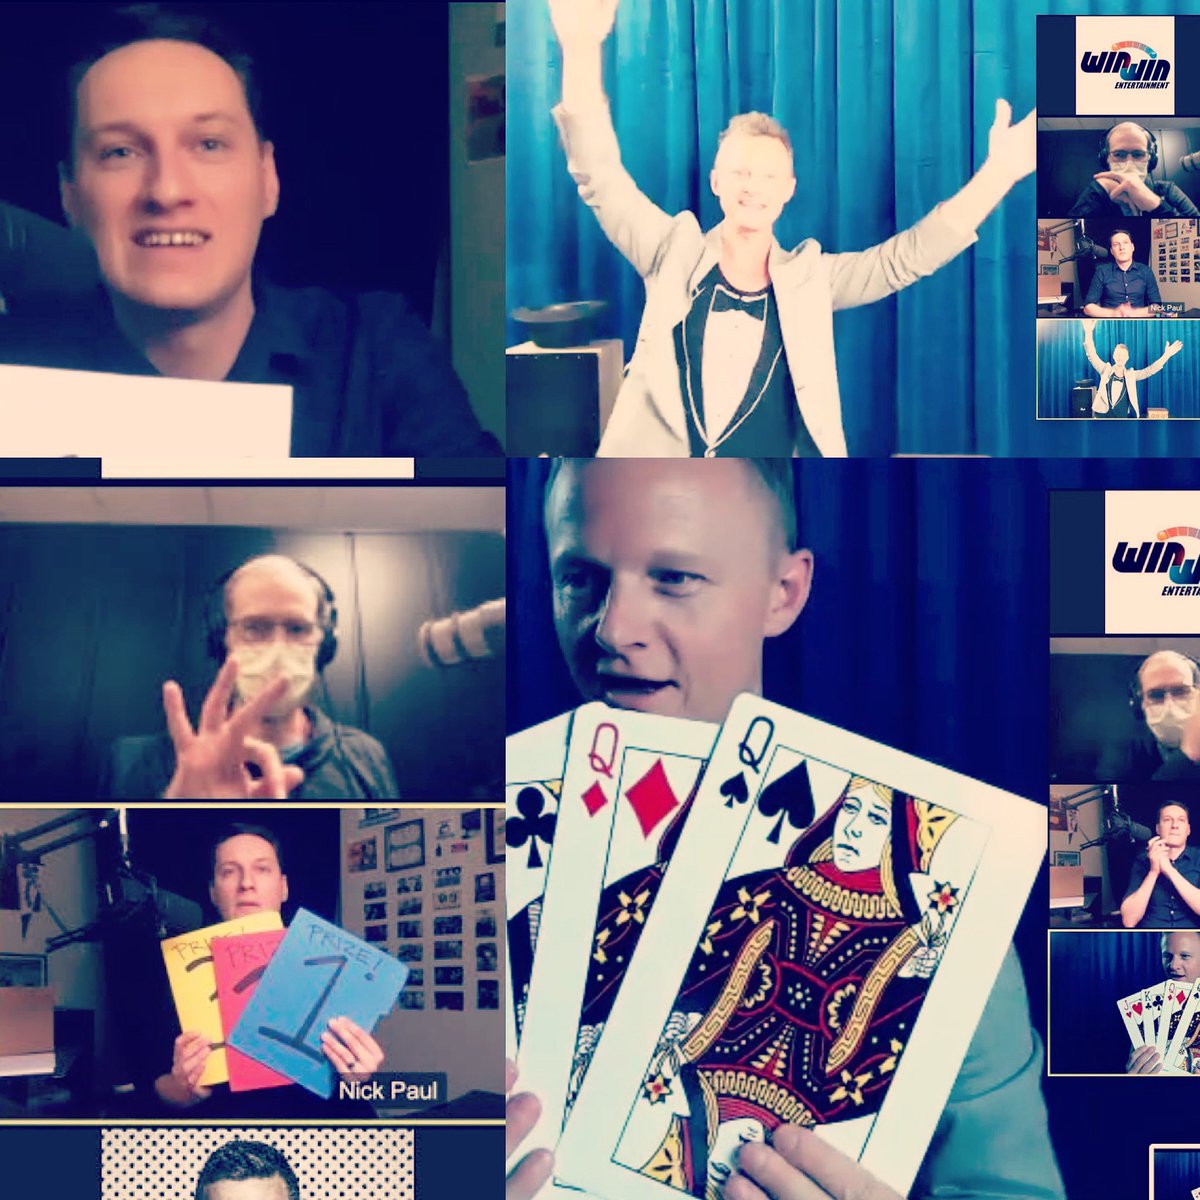 Had a blast performing virtually with my buddy @nickpaulreal for @PhxChildrens & @winwincharity!